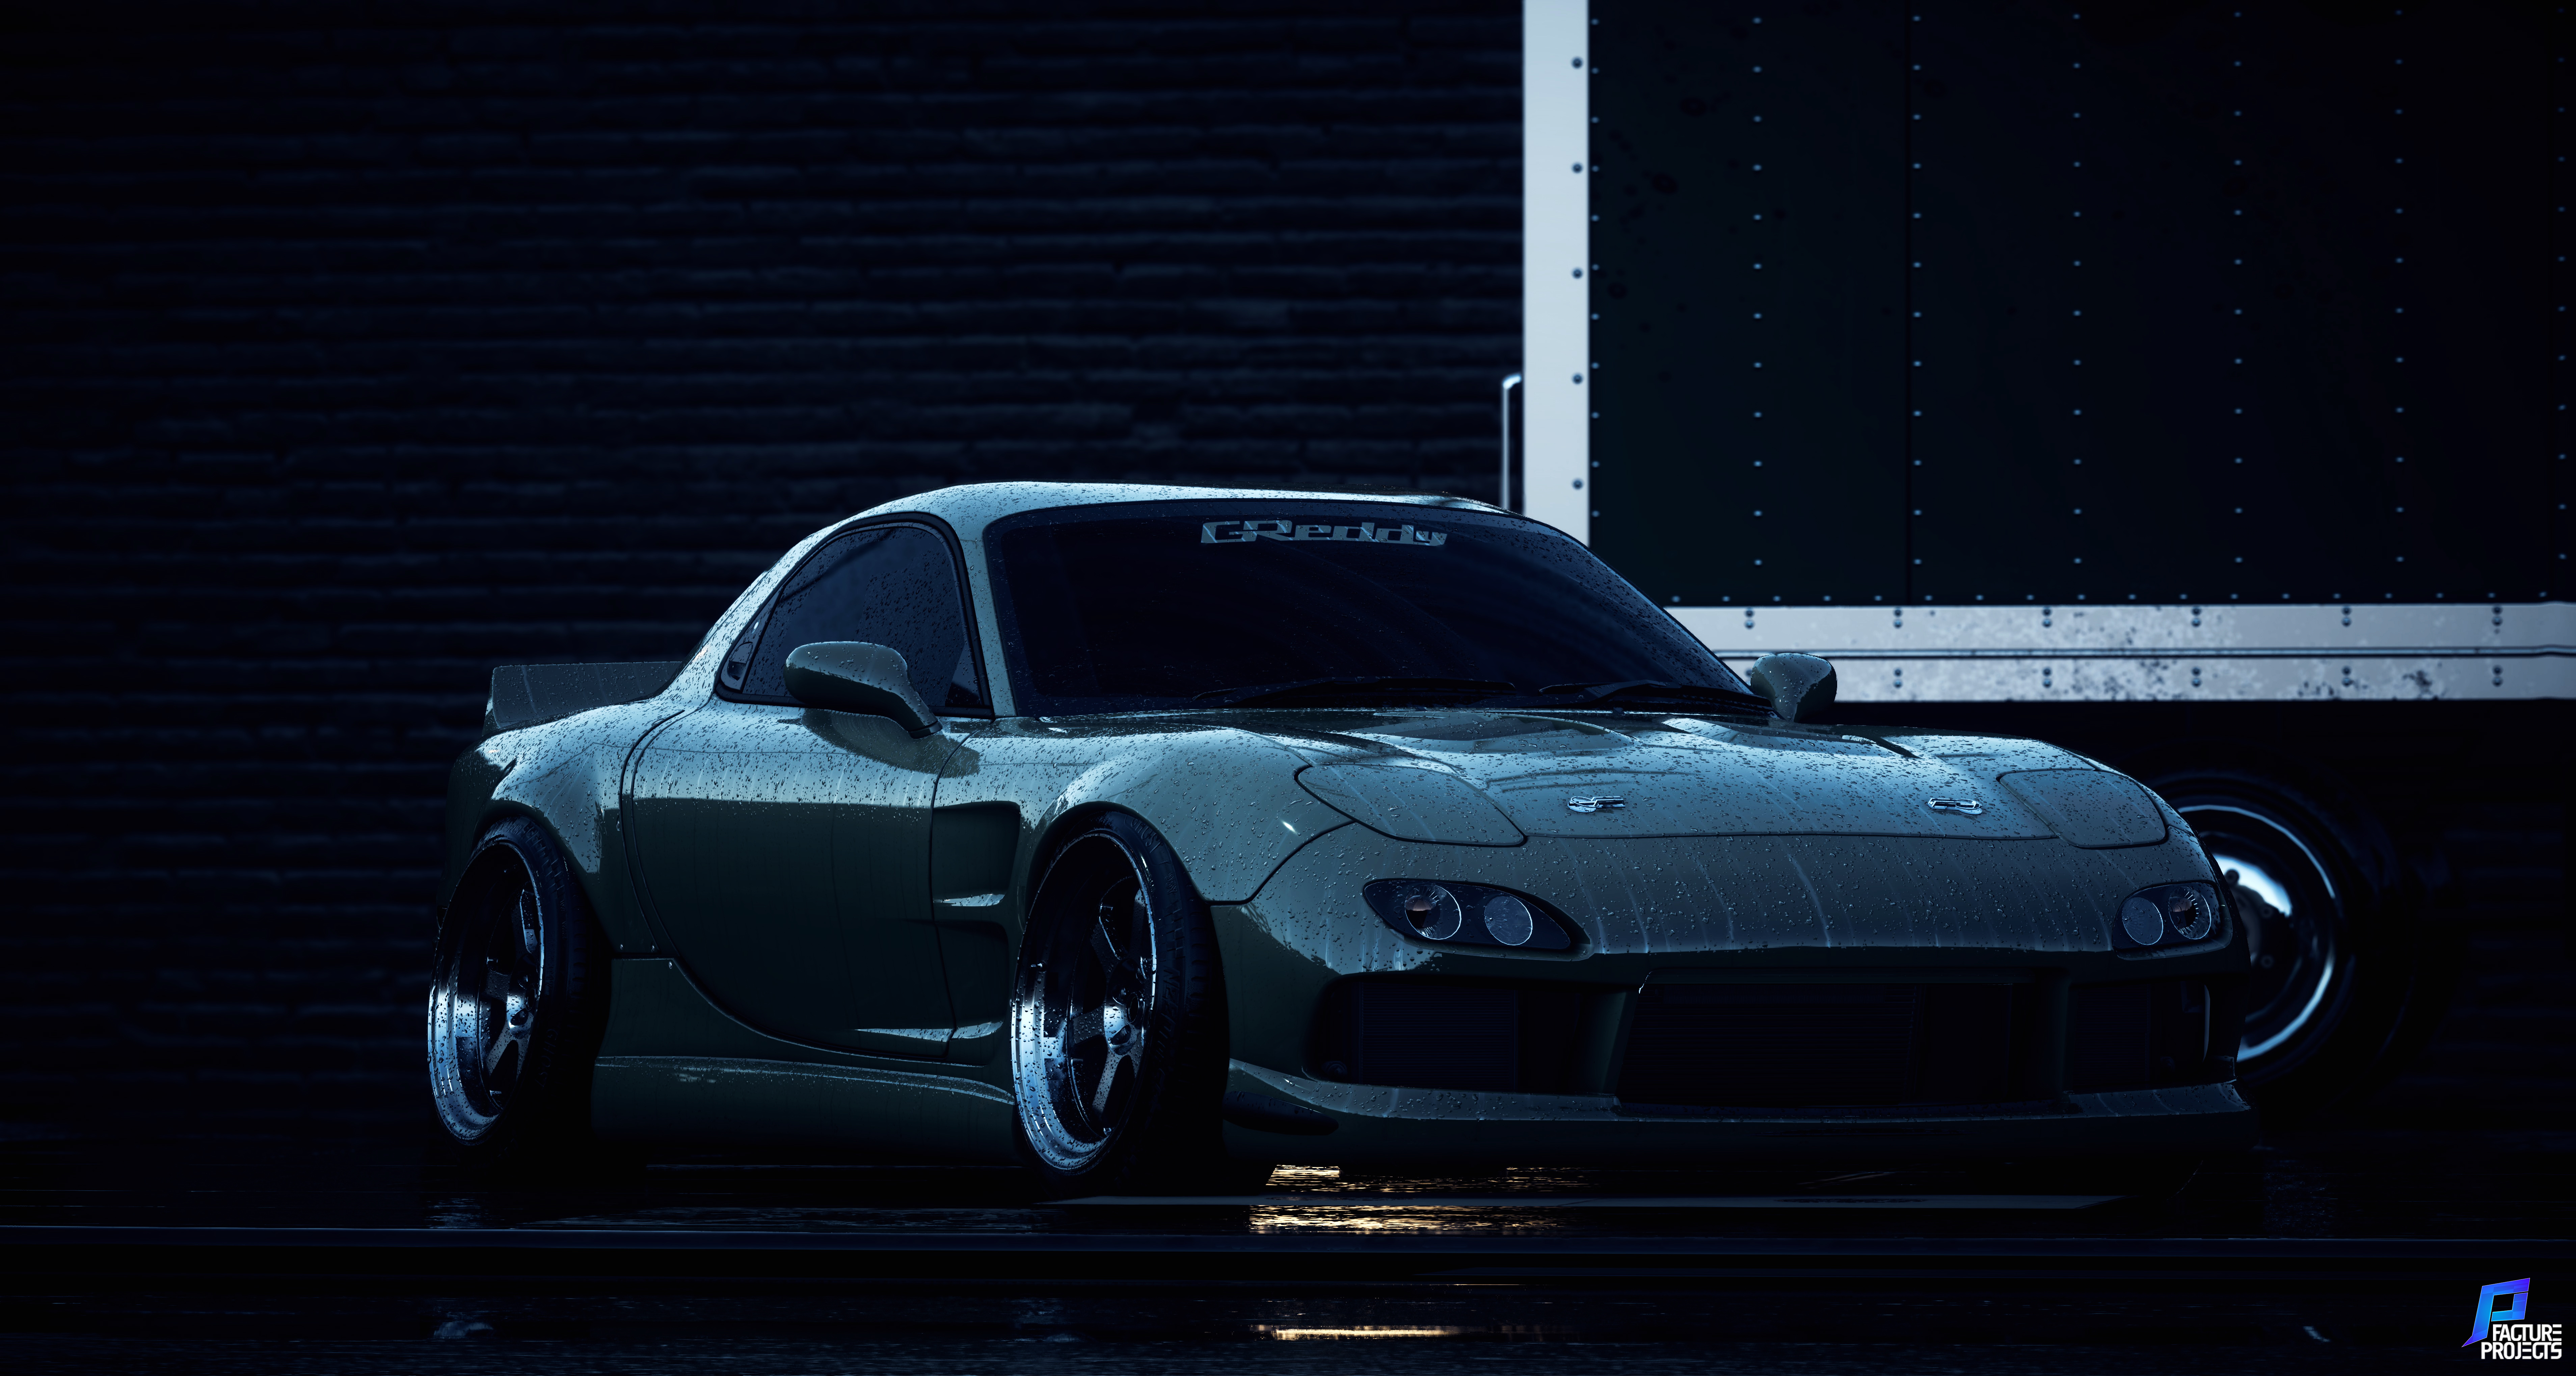 Mazda RX 7 Mazda Need For Speed Need For Speed 2015 NFS 2015 Car 7632x4076.